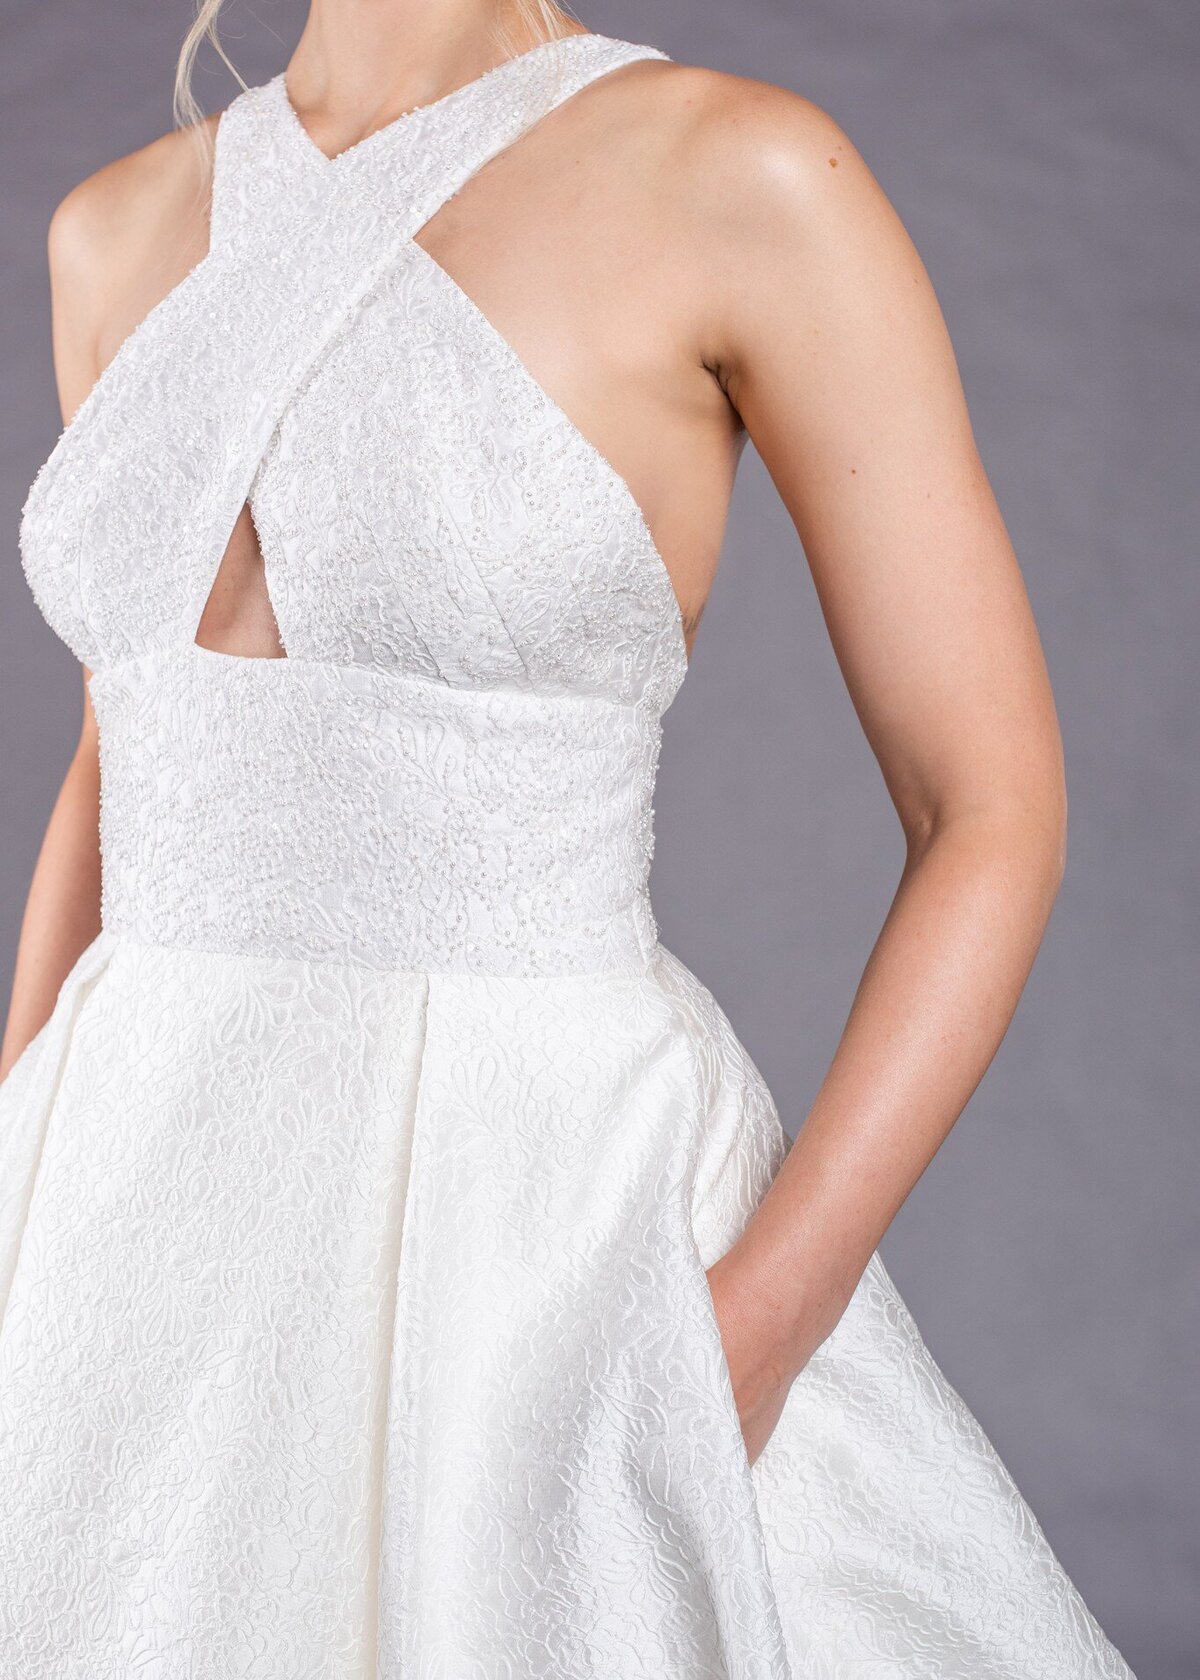 Besides being a wedding dress with pockets, the textured fabric is beaded on the bodice for an added subtle sparkle.